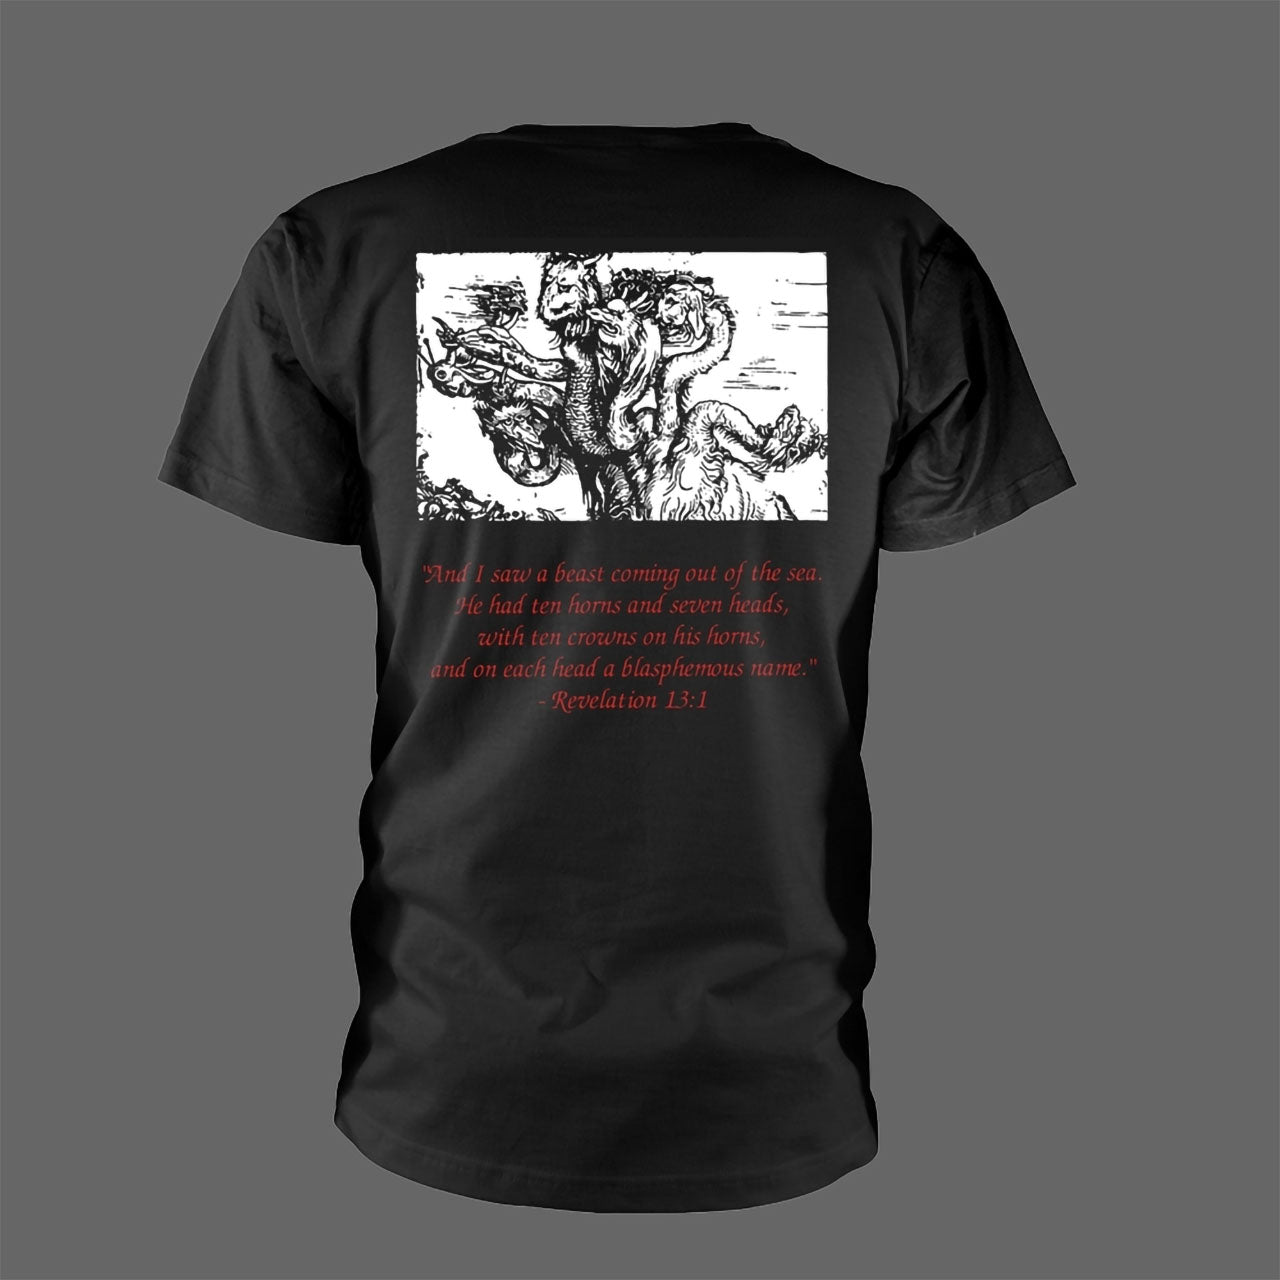 Emperor - Wrath of the Tyrant (T-Shirt)